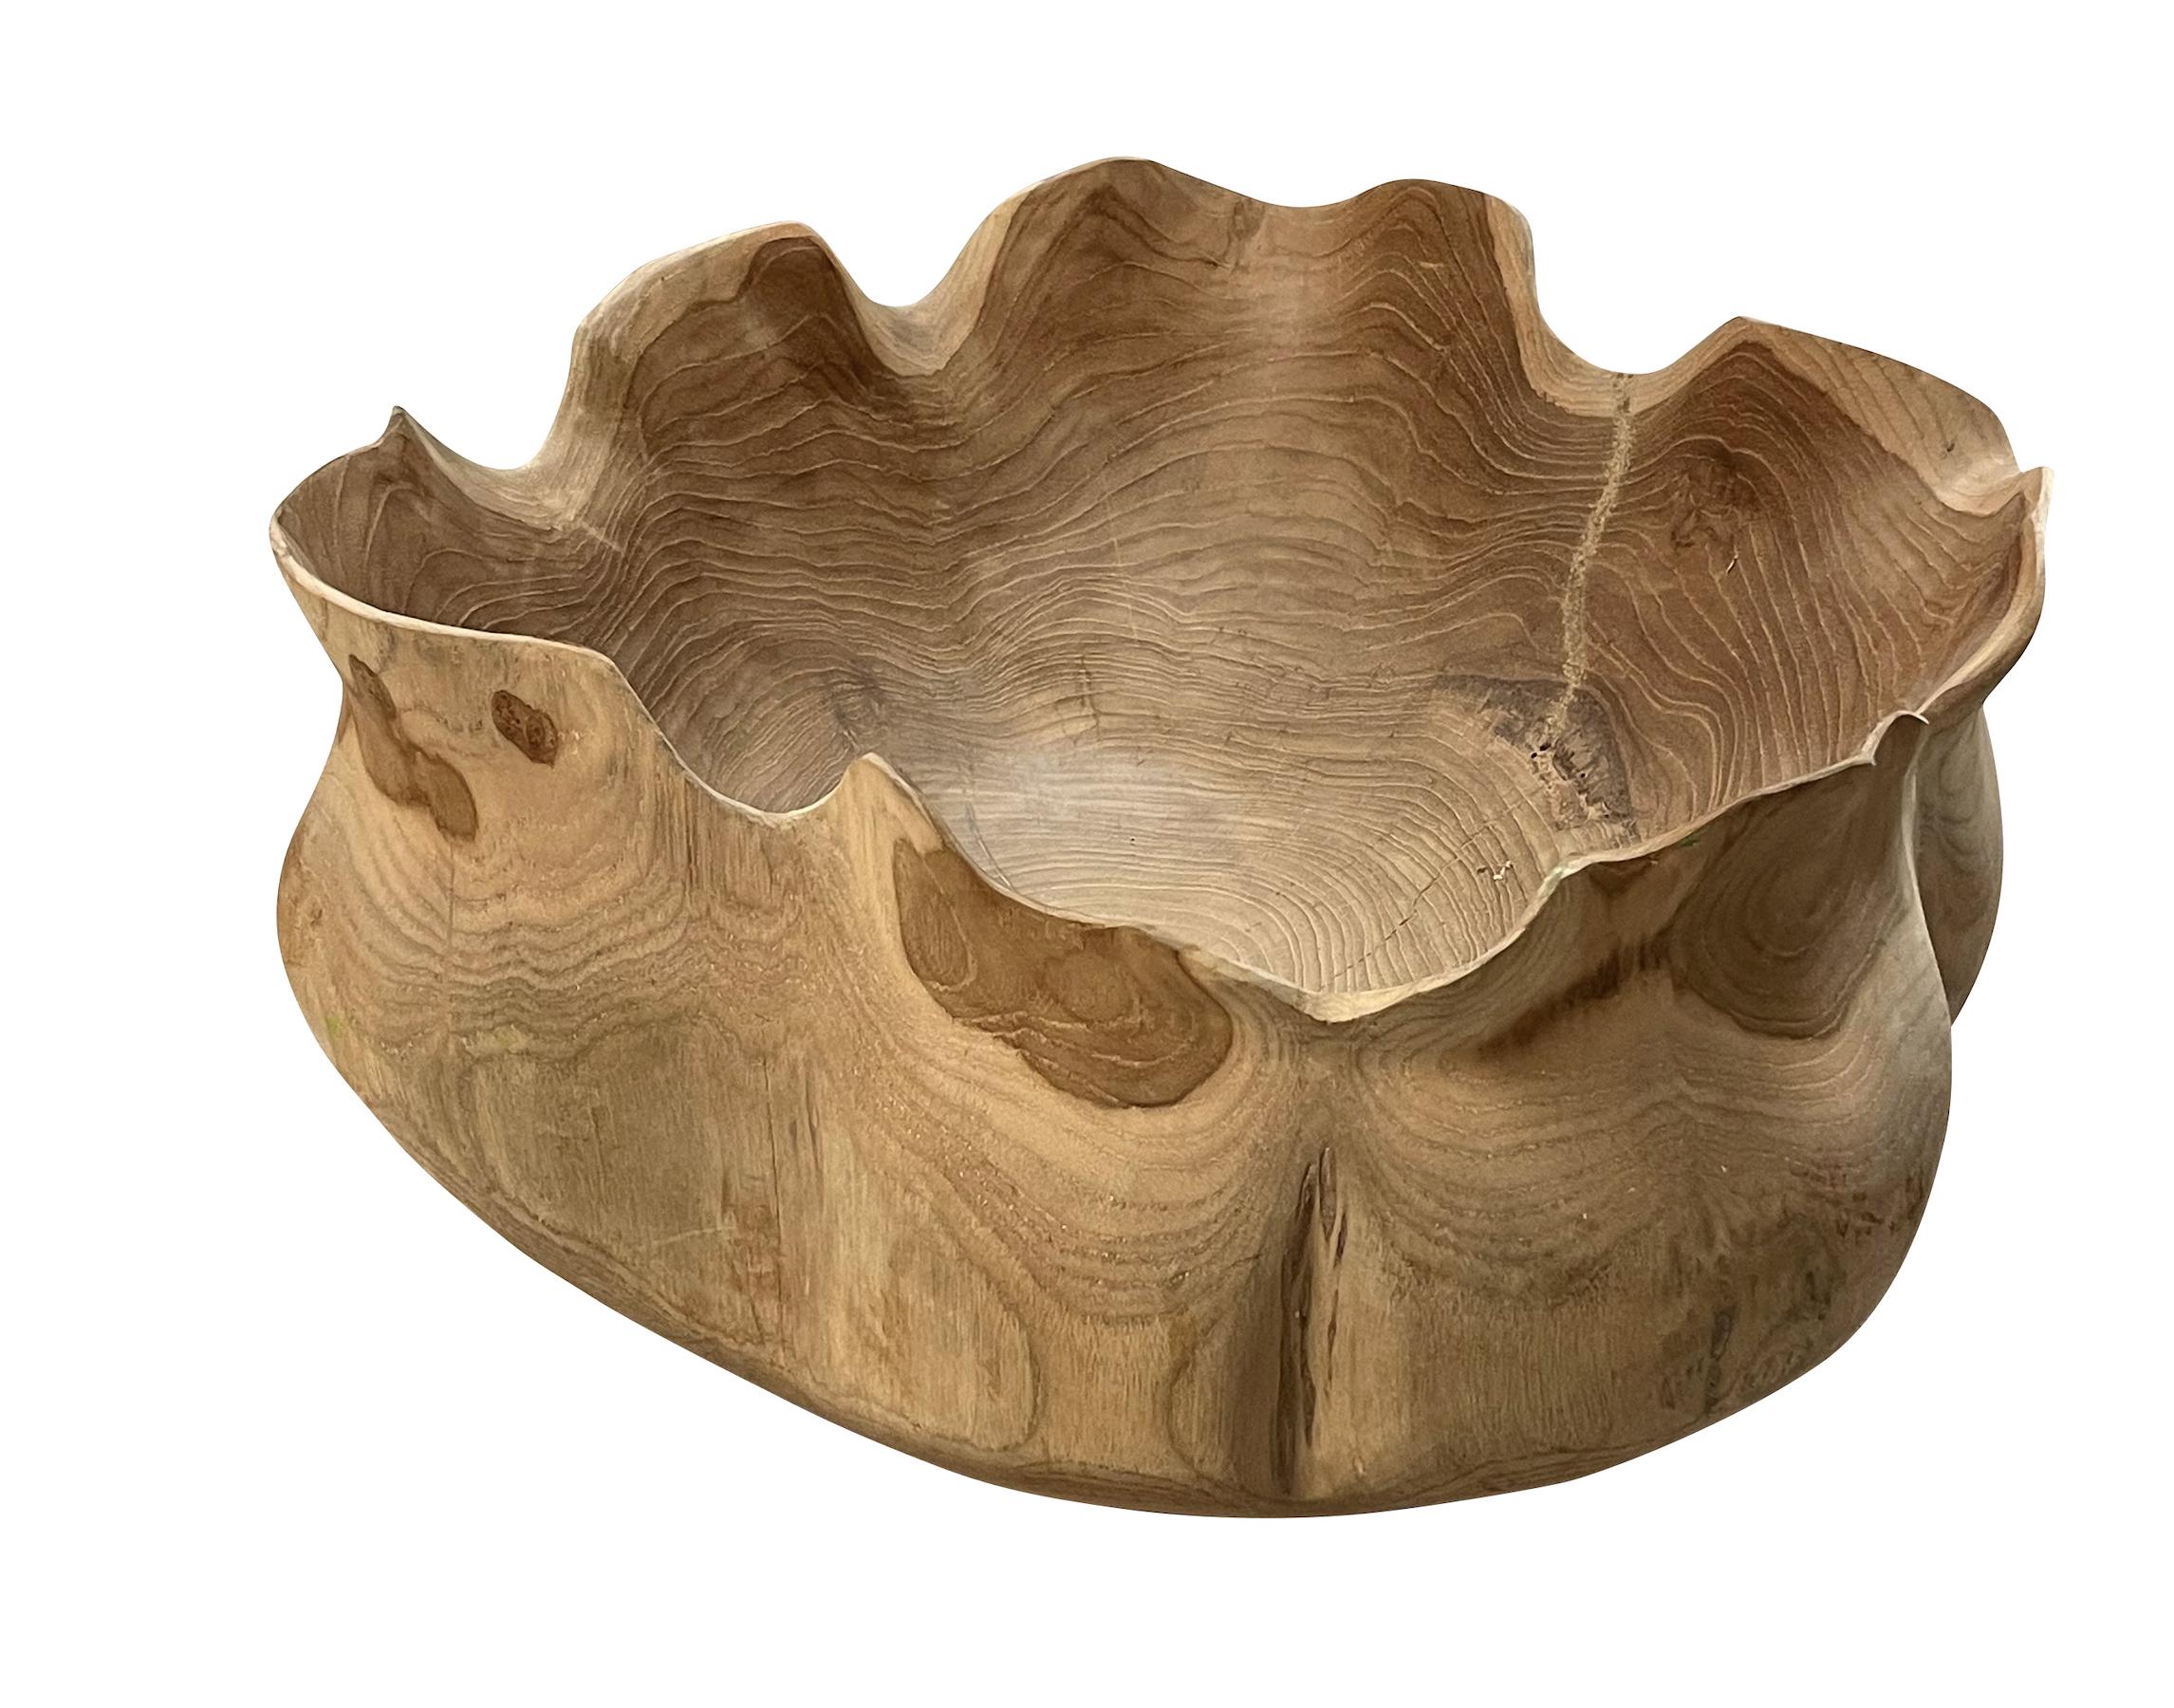 Contemporary Indonesian wooden bowl with free form shape and scalloped edge.
ARRIVING APRIL